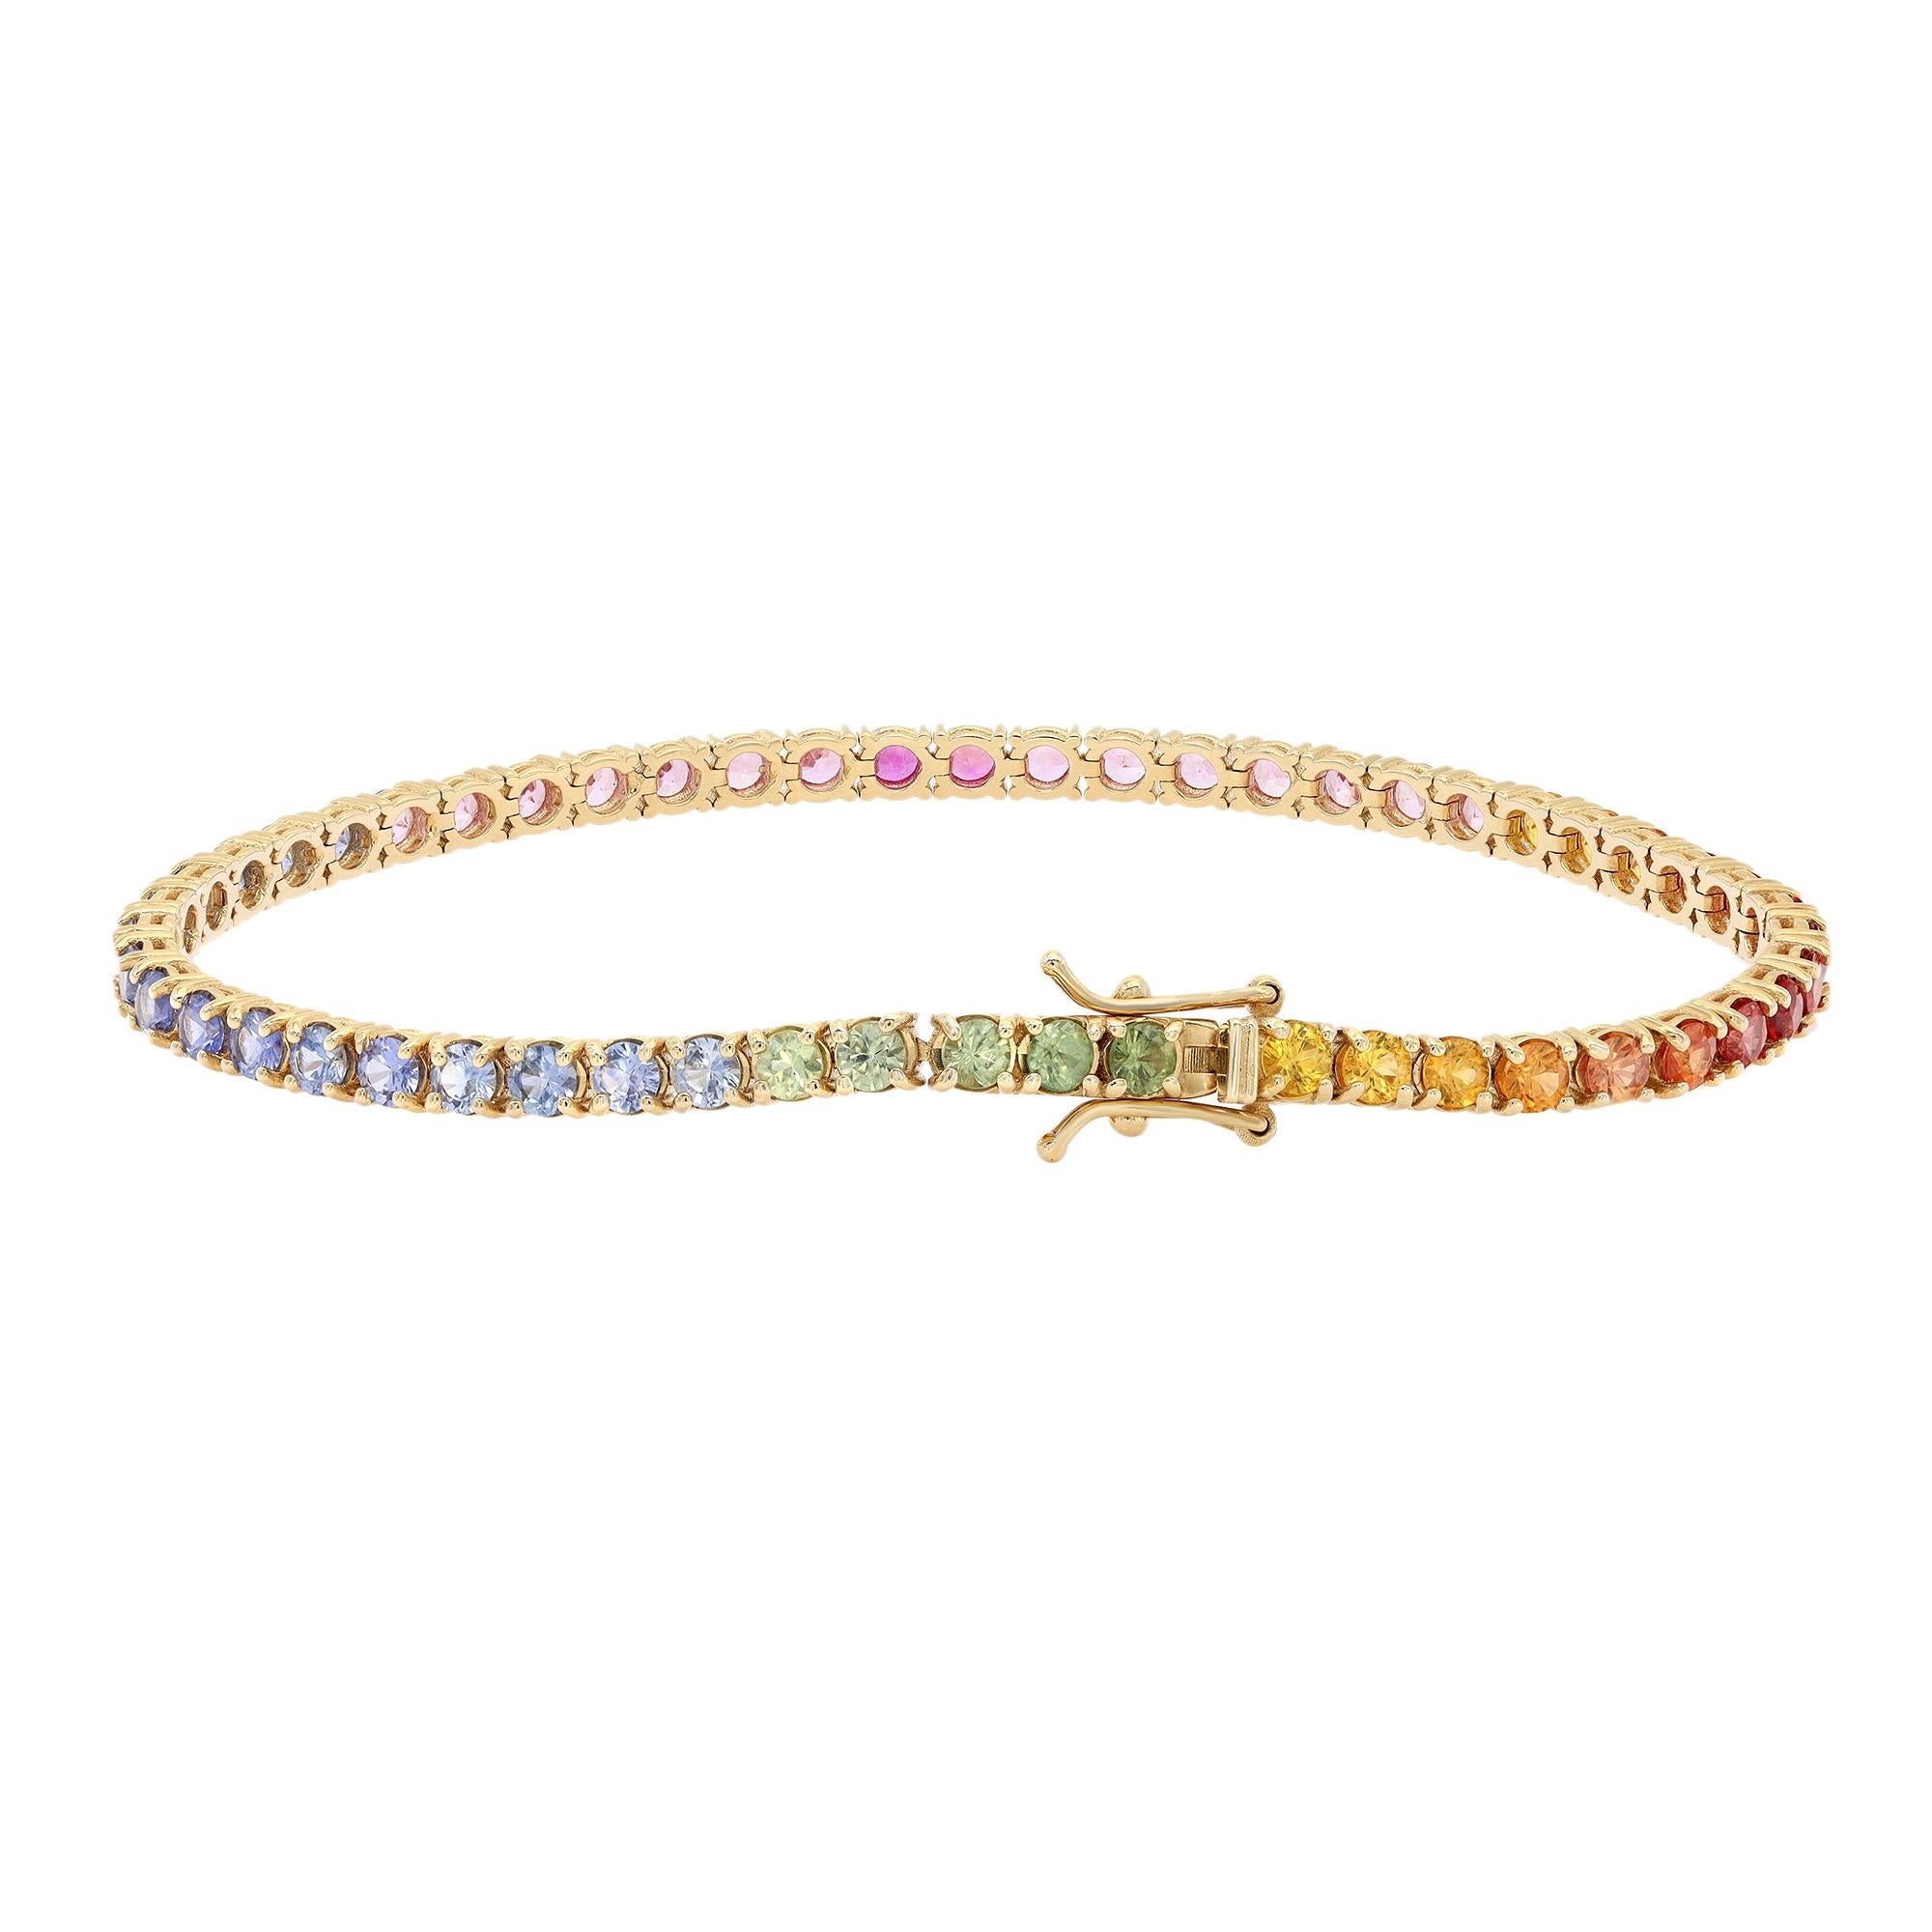 A classic yet vibrant rainbow tennis bracelet blazing with the brilliance of 53 round brilliant cut natural multicolored Sapphires with a total weight of 7 carats. Crafted in sleek 14k yellow gold. Four prong setting. Bracelet length: 7 inches.